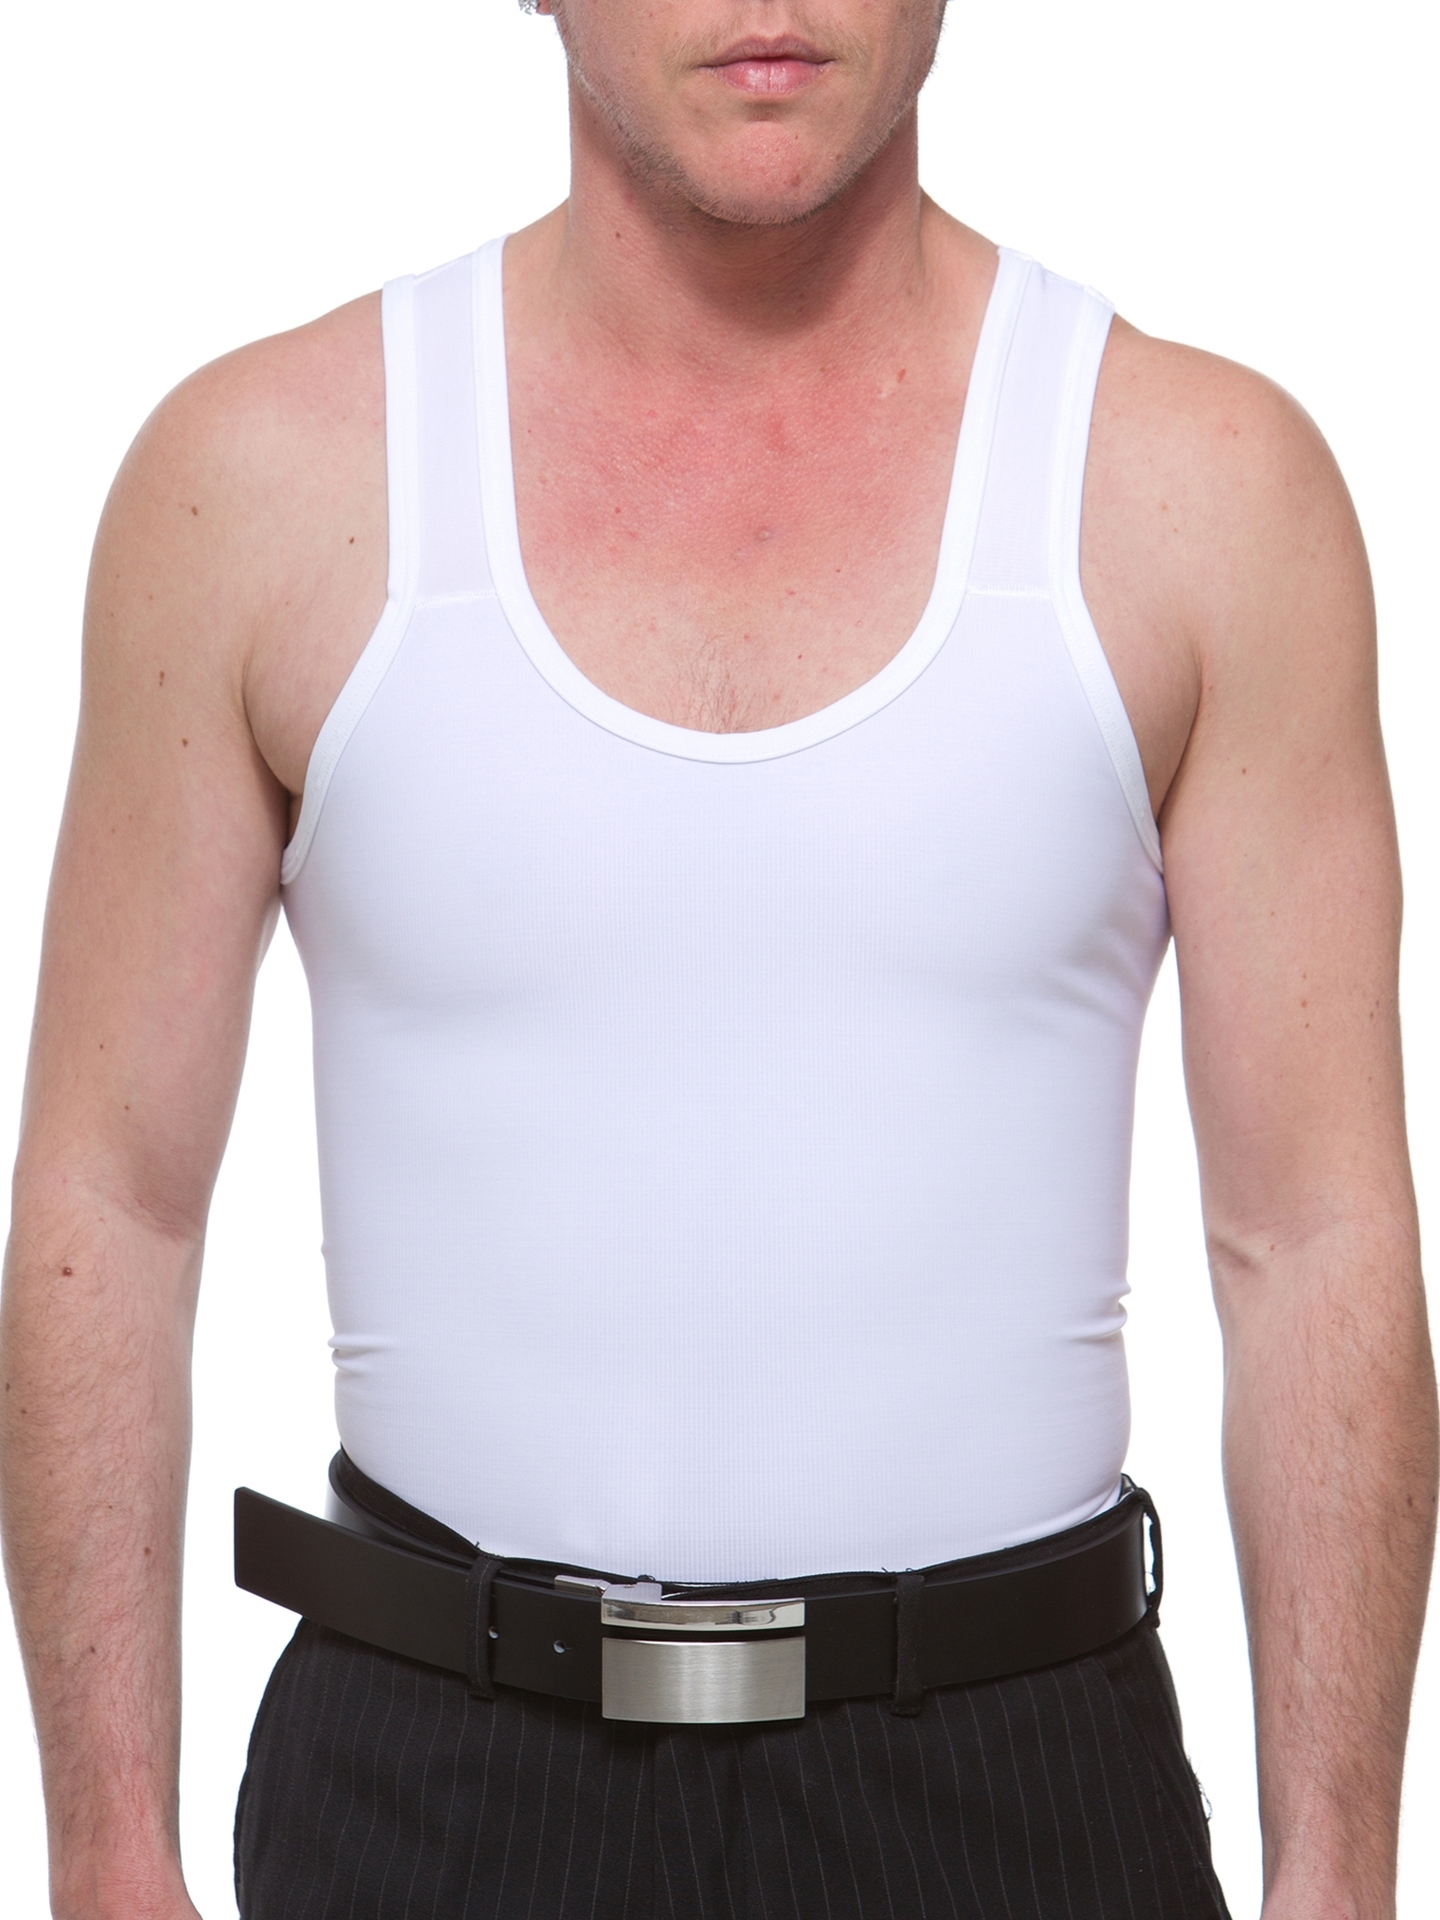 FTM Compression Body Shirt. FTM Chest Binders for Trans Men by Underworks